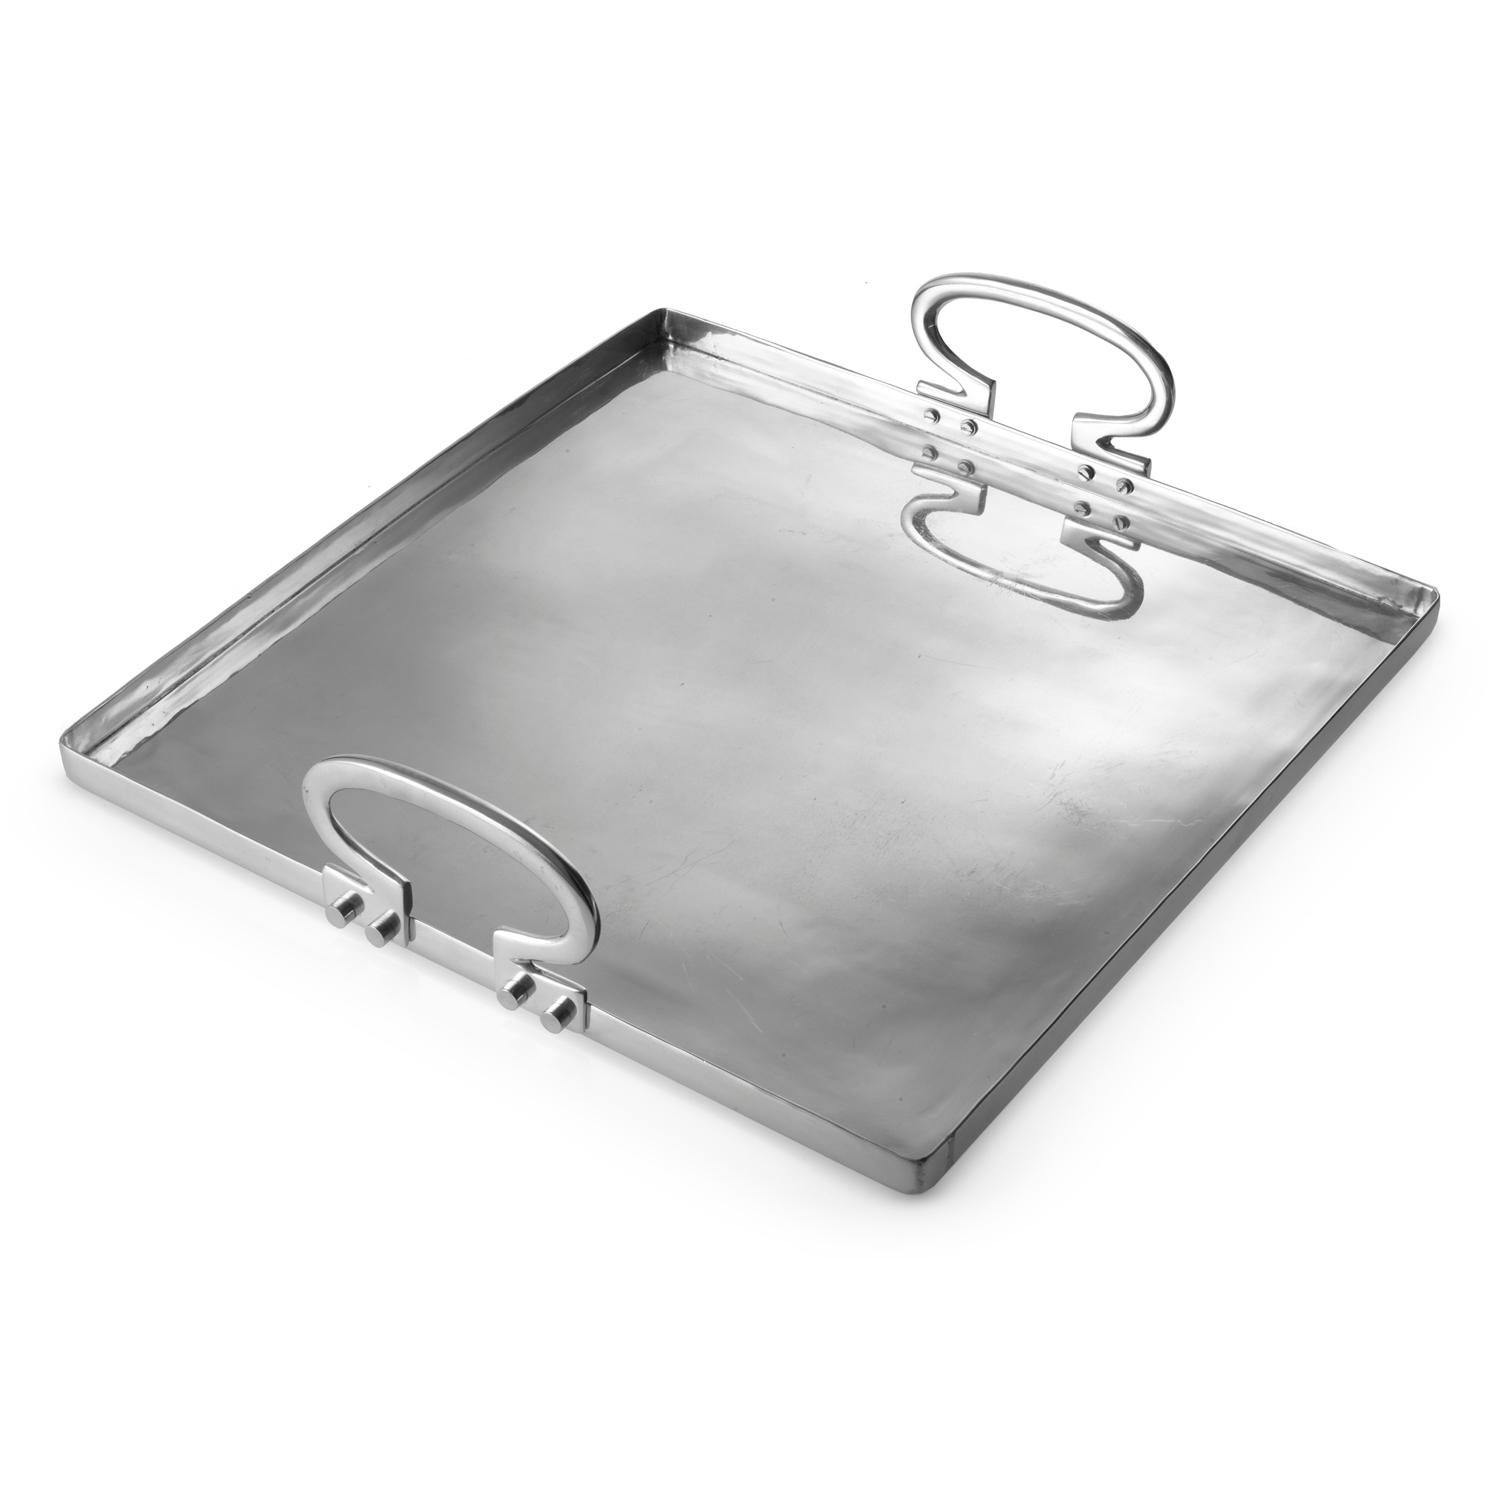 Colony is a polished aluminium tray designed by Aldo Cibic. The square silhouette is Minimalist, but the rounded corners and the sinuous handles give to the object a warm and refined look. Colony is perfect on any occasion to serve drinks or food